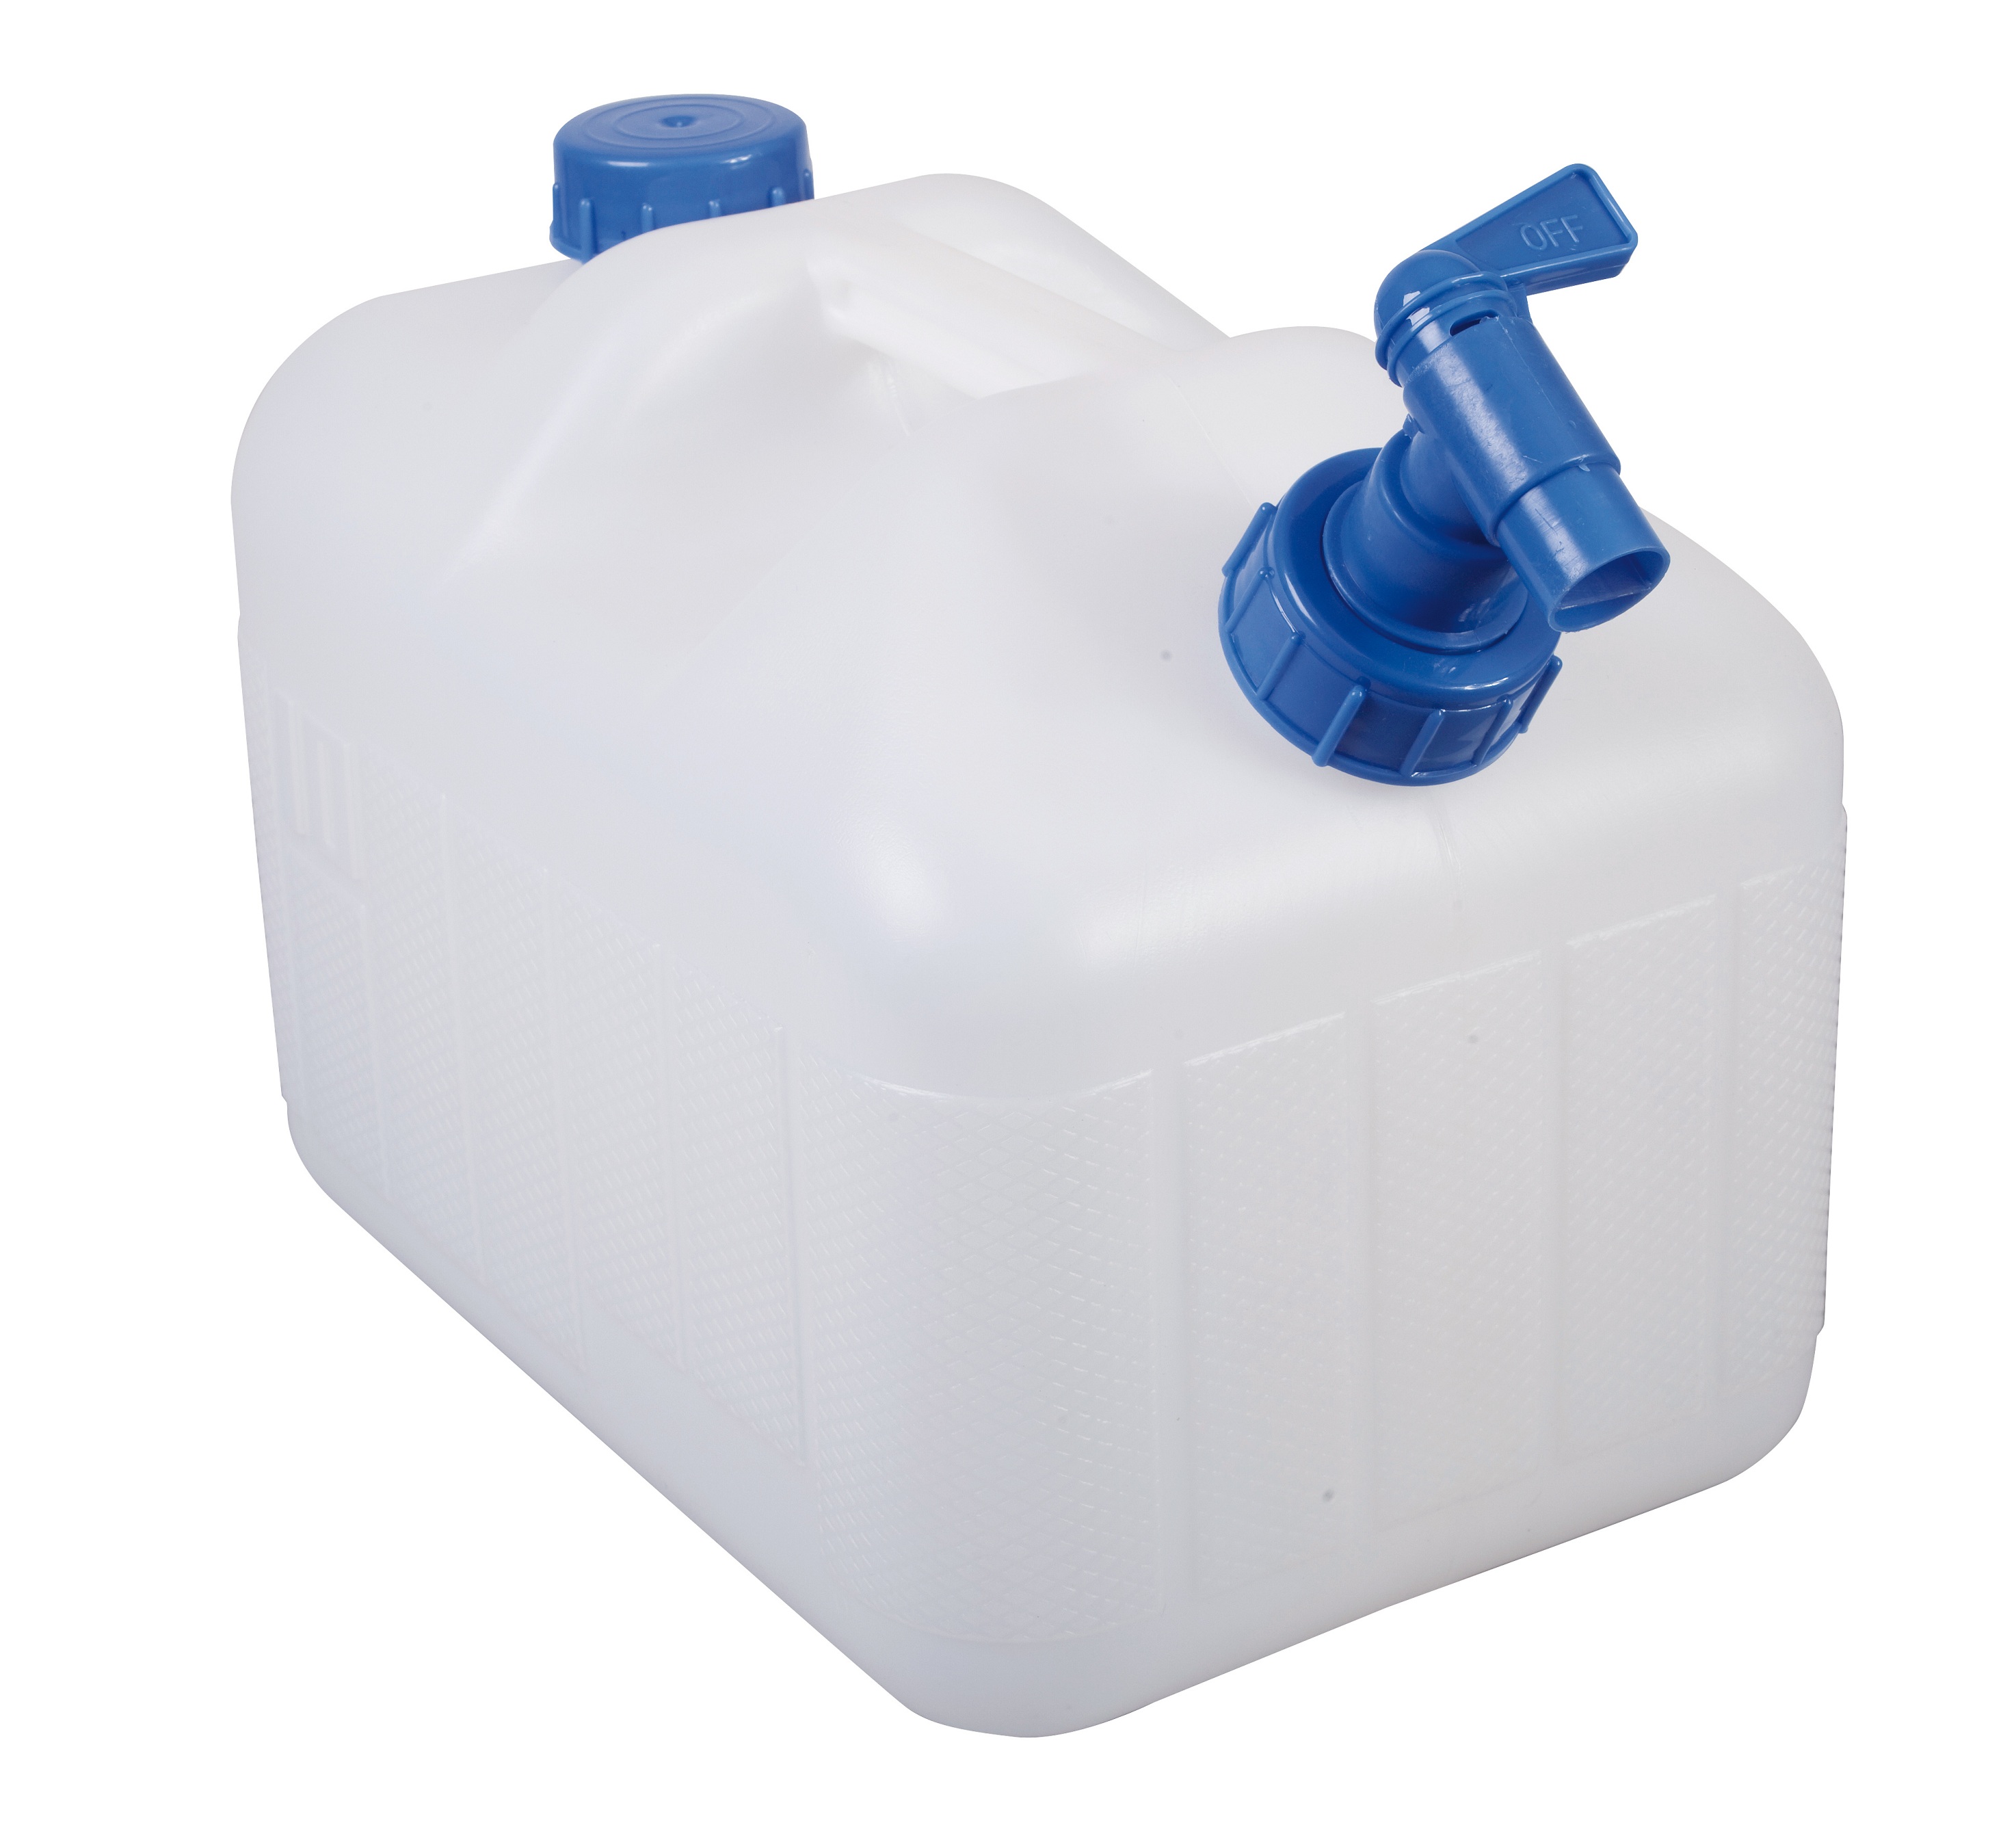 20 Litre Plastic Water Jerry Can Carrier Container Storage With Pouring tap 10 